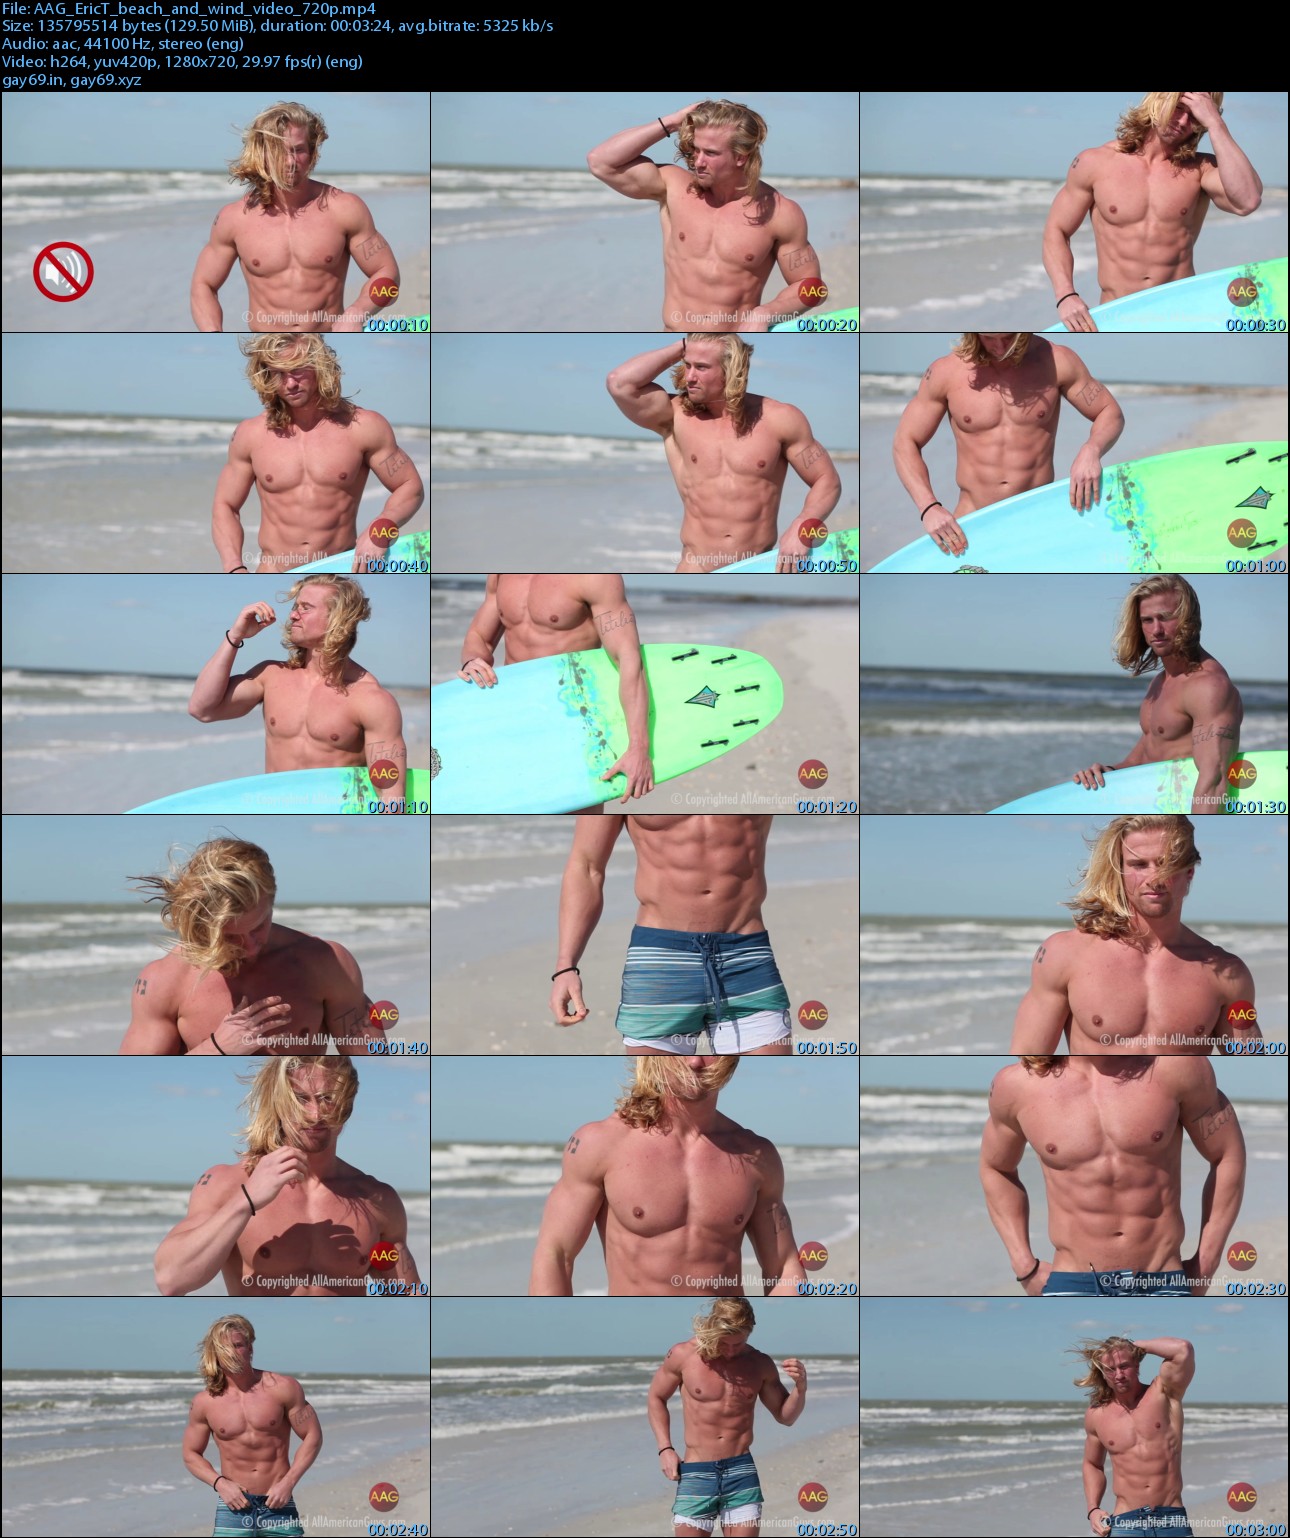 AAG_EricT_beach_and_wind_video_720p_s.jpg